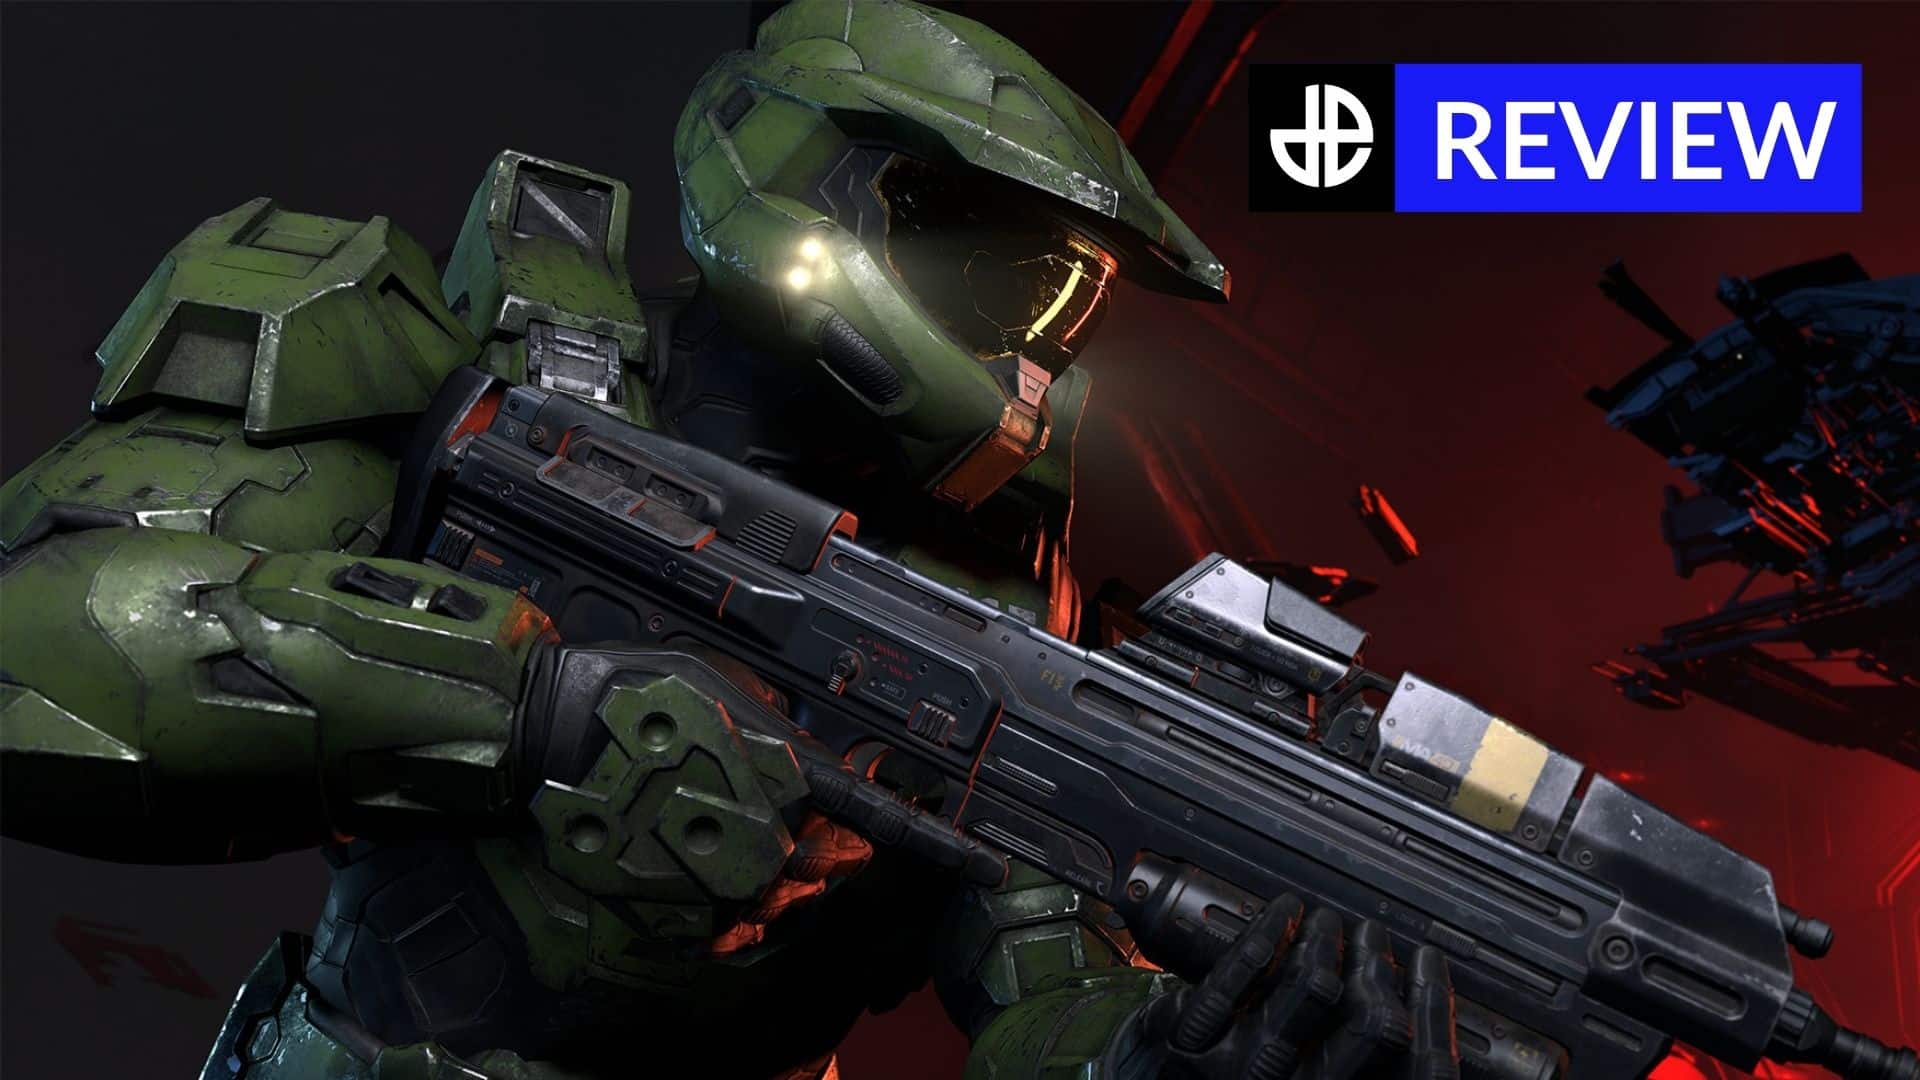 Halo Infinite review header image showing Master Chief